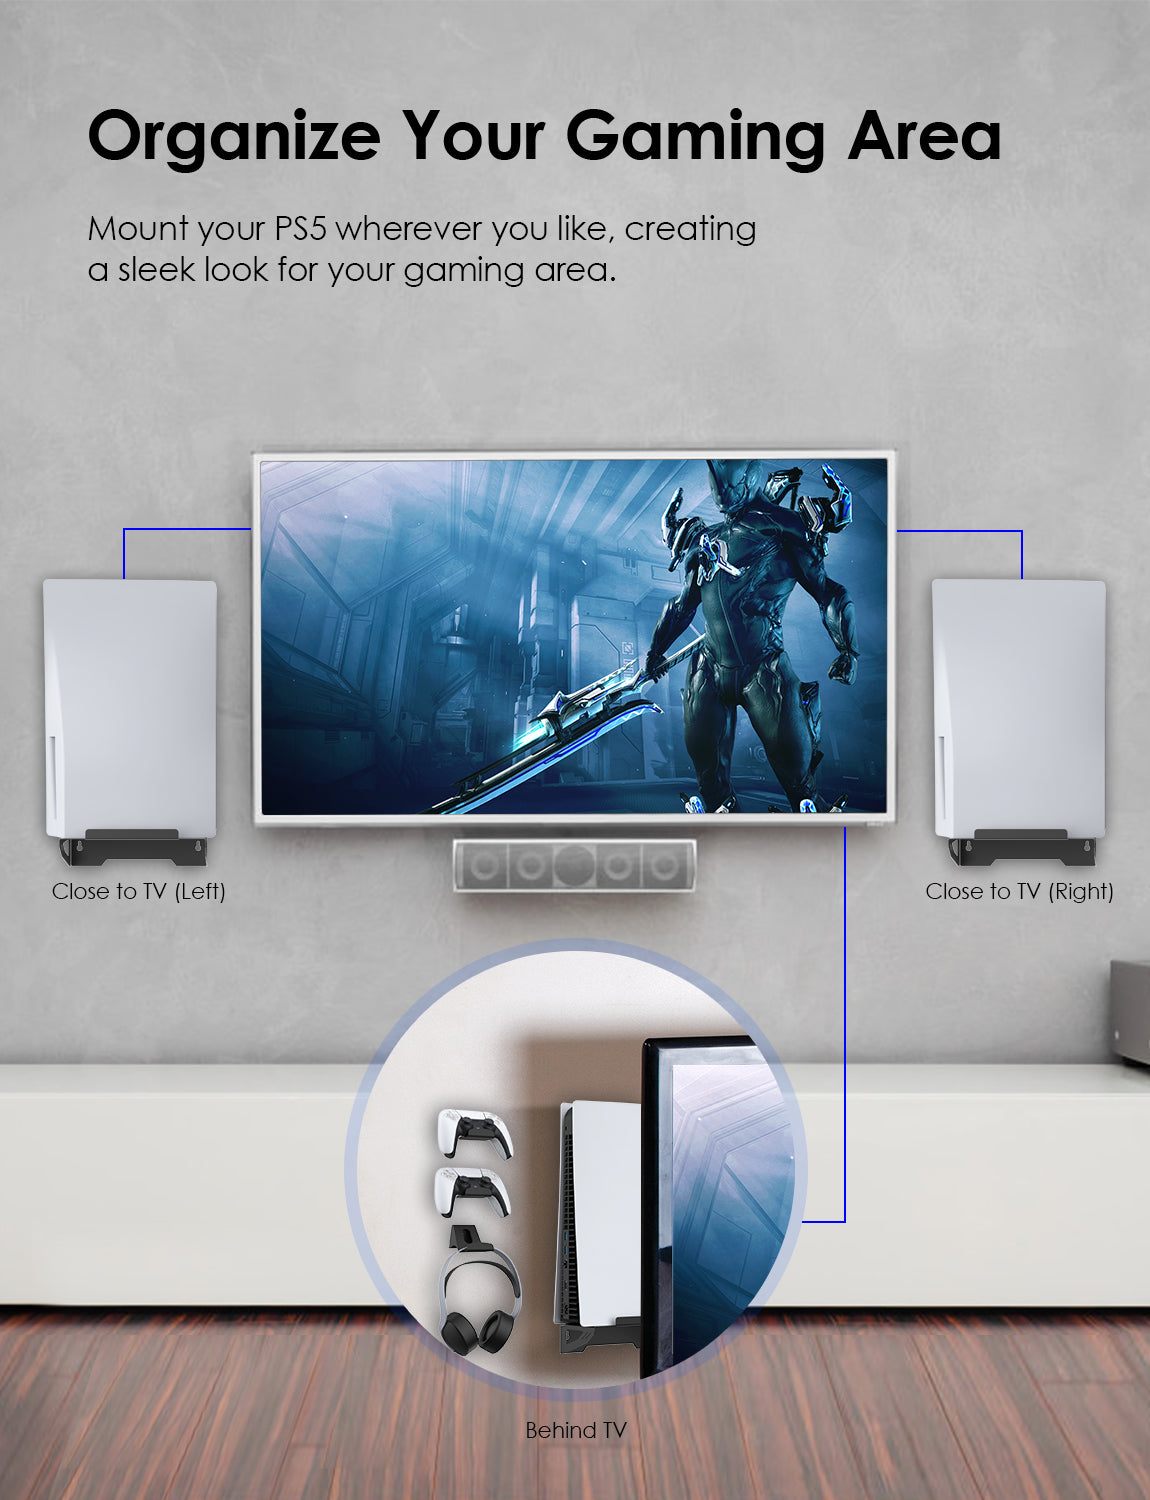 Install the console near the TV with this wall mount for a tidy gaming space.